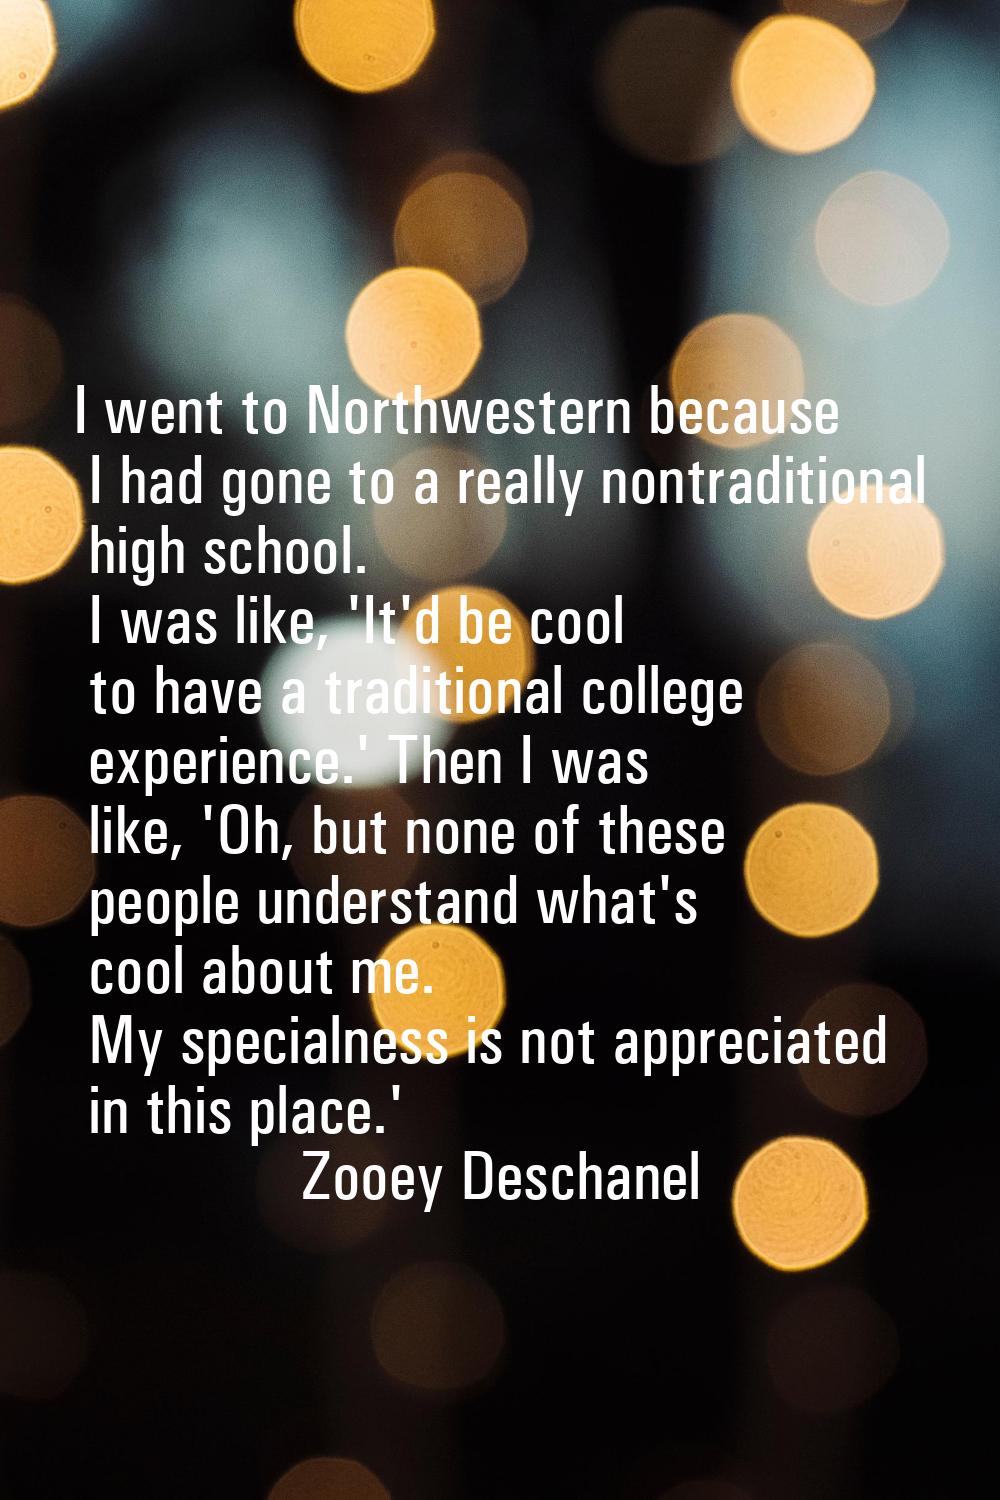 I went to Northwestern because I had gone to a really nontraditional high school. I was like, 'It'd